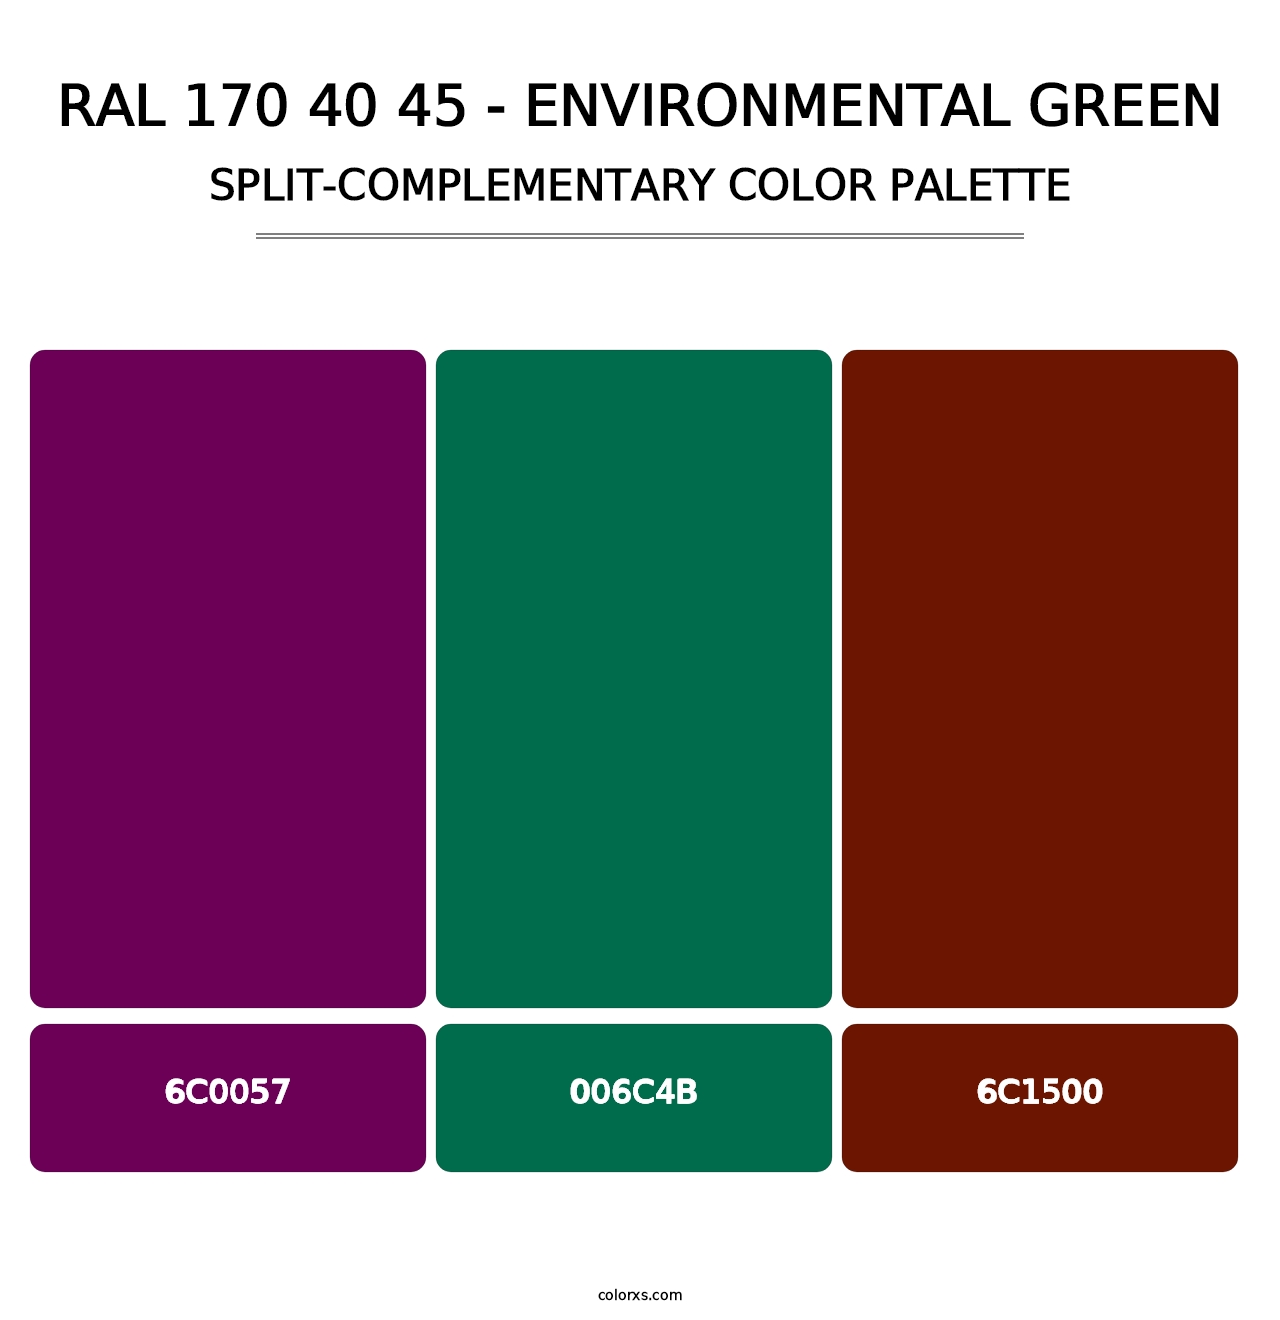 RAL 170 40 45 - Environmental Green - Split-Complementary Color Palette